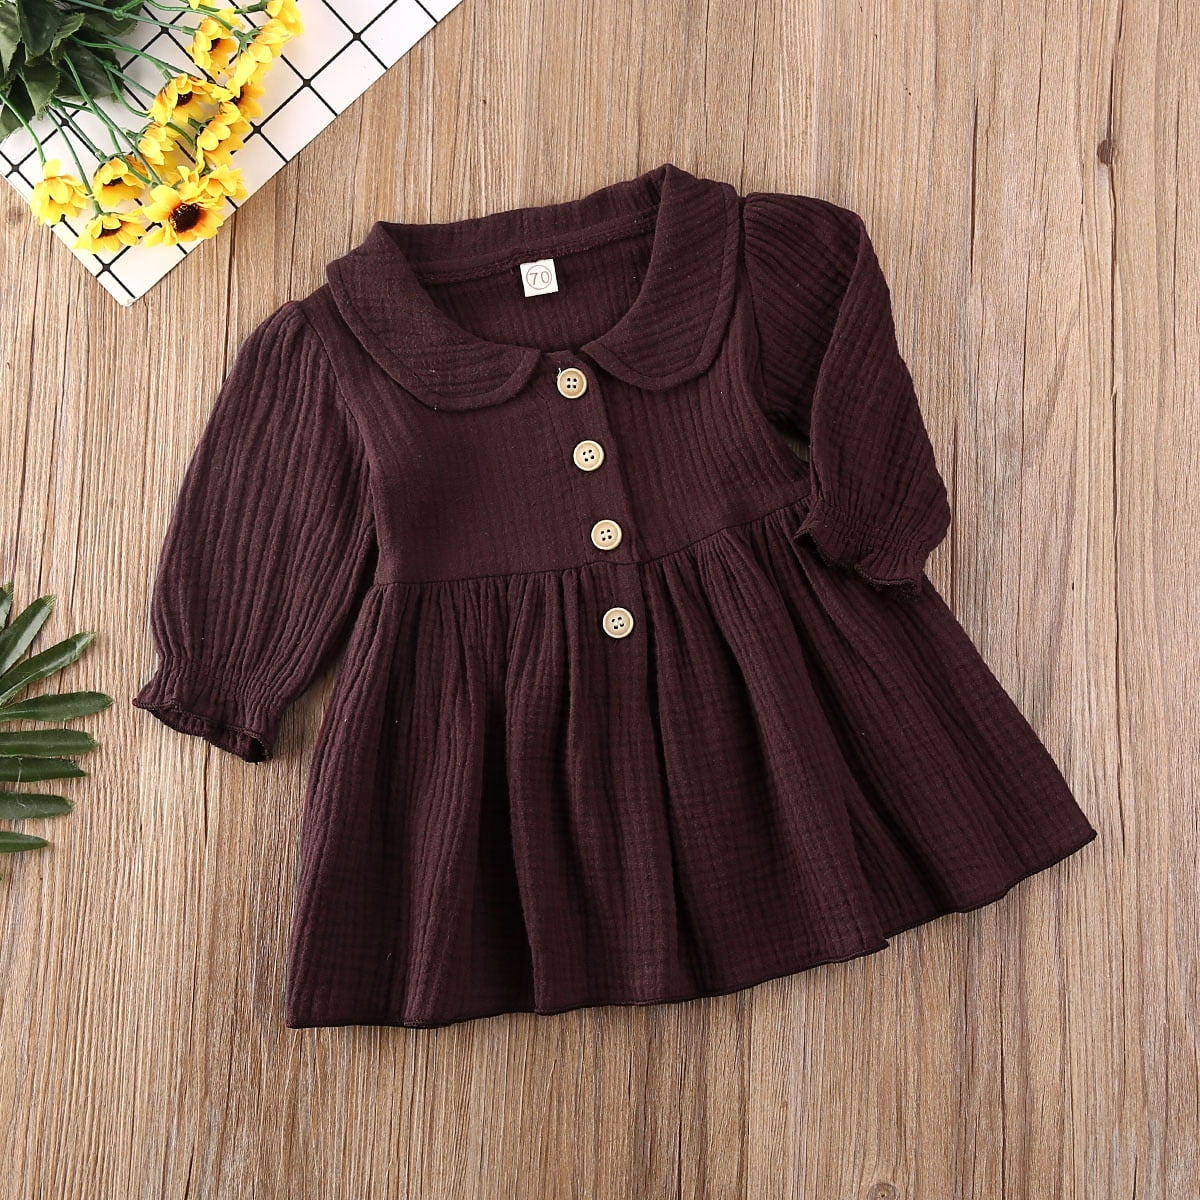 Baby Girls Candy Color Long Sleeve Solid Princess Casual Toddler Kids Dress FW18 